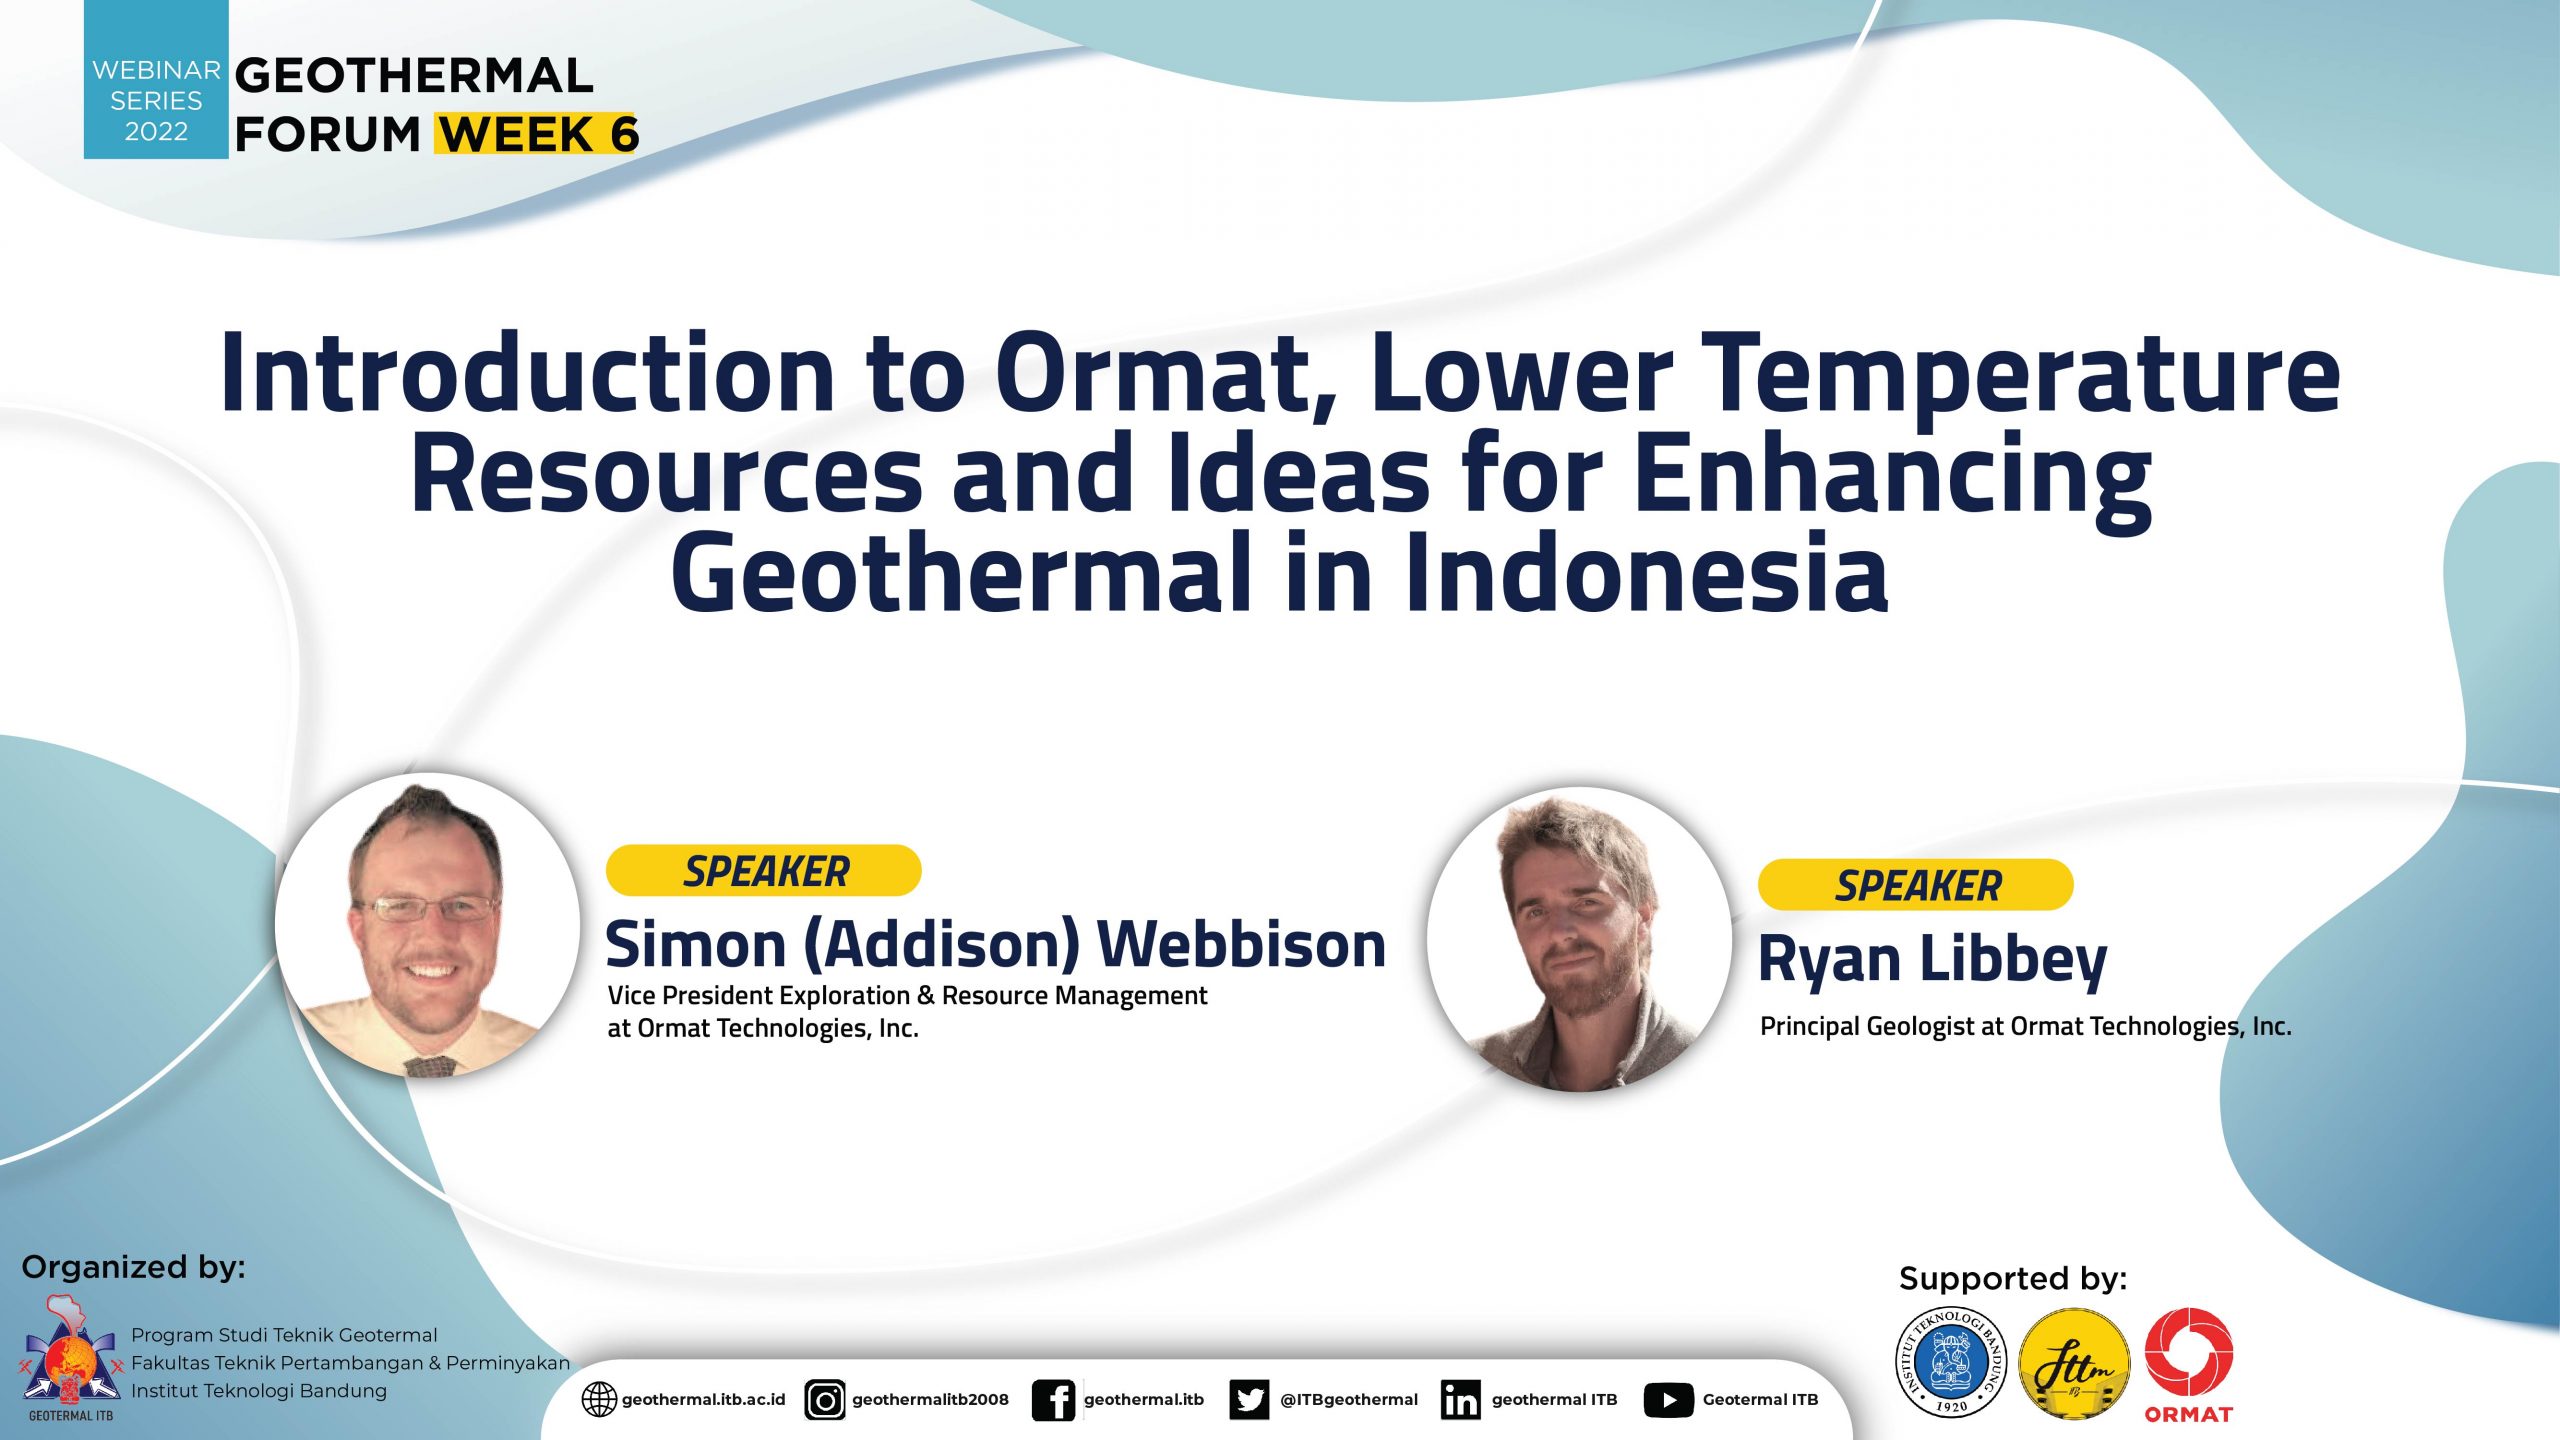 Introduction to Ormat, Lower Temperature Resources and Ideas for Enhancing Geothermal in Indonesia